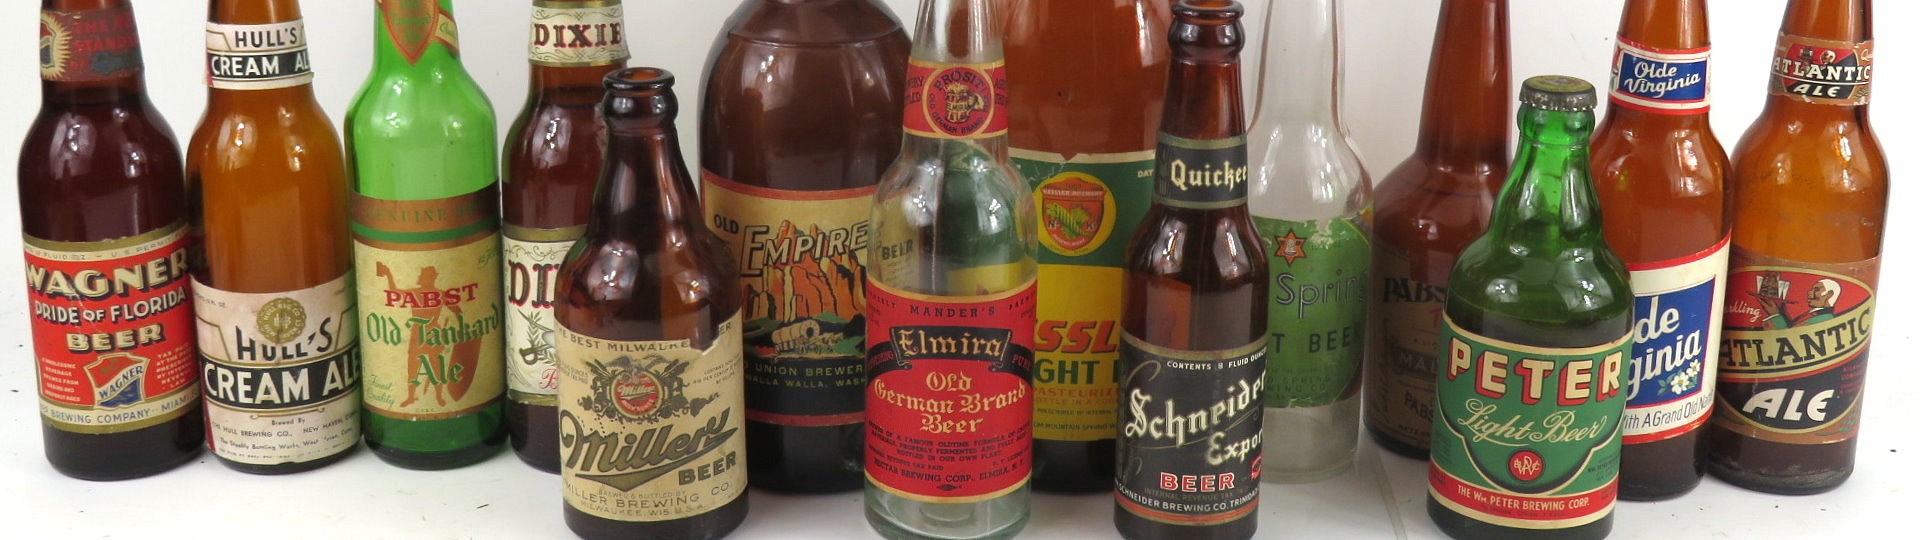 TavernTrove's "Two-Nights in March" Vintage Beer Bottle Auction (Day 2) by TavernTrove